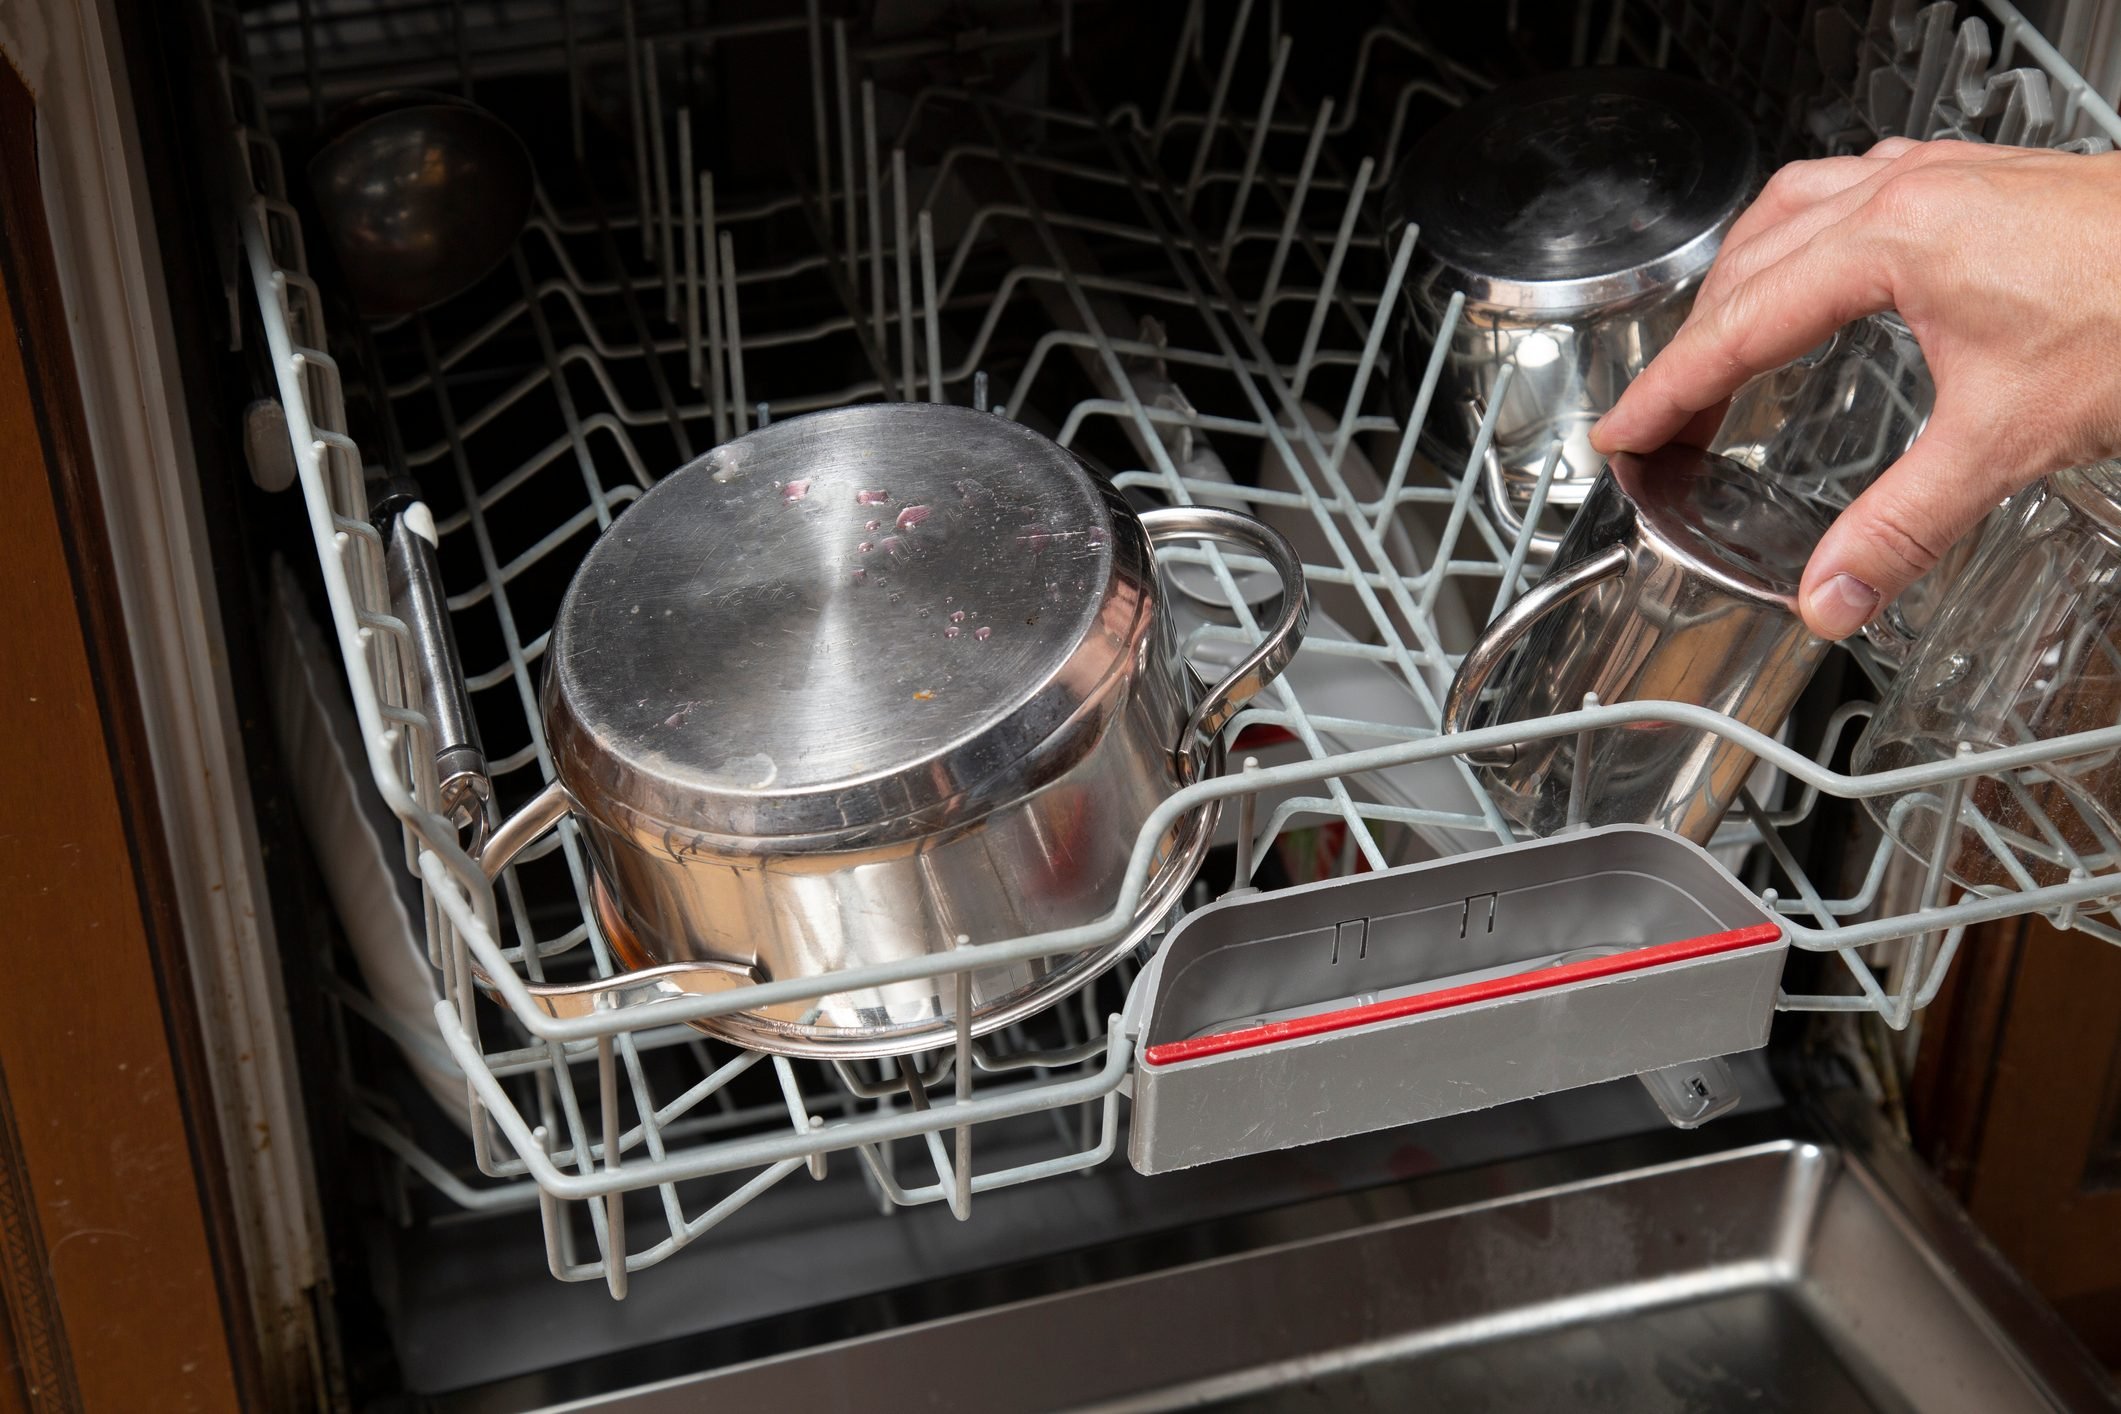 Can Stainless Steel Go In the Dishwasher?